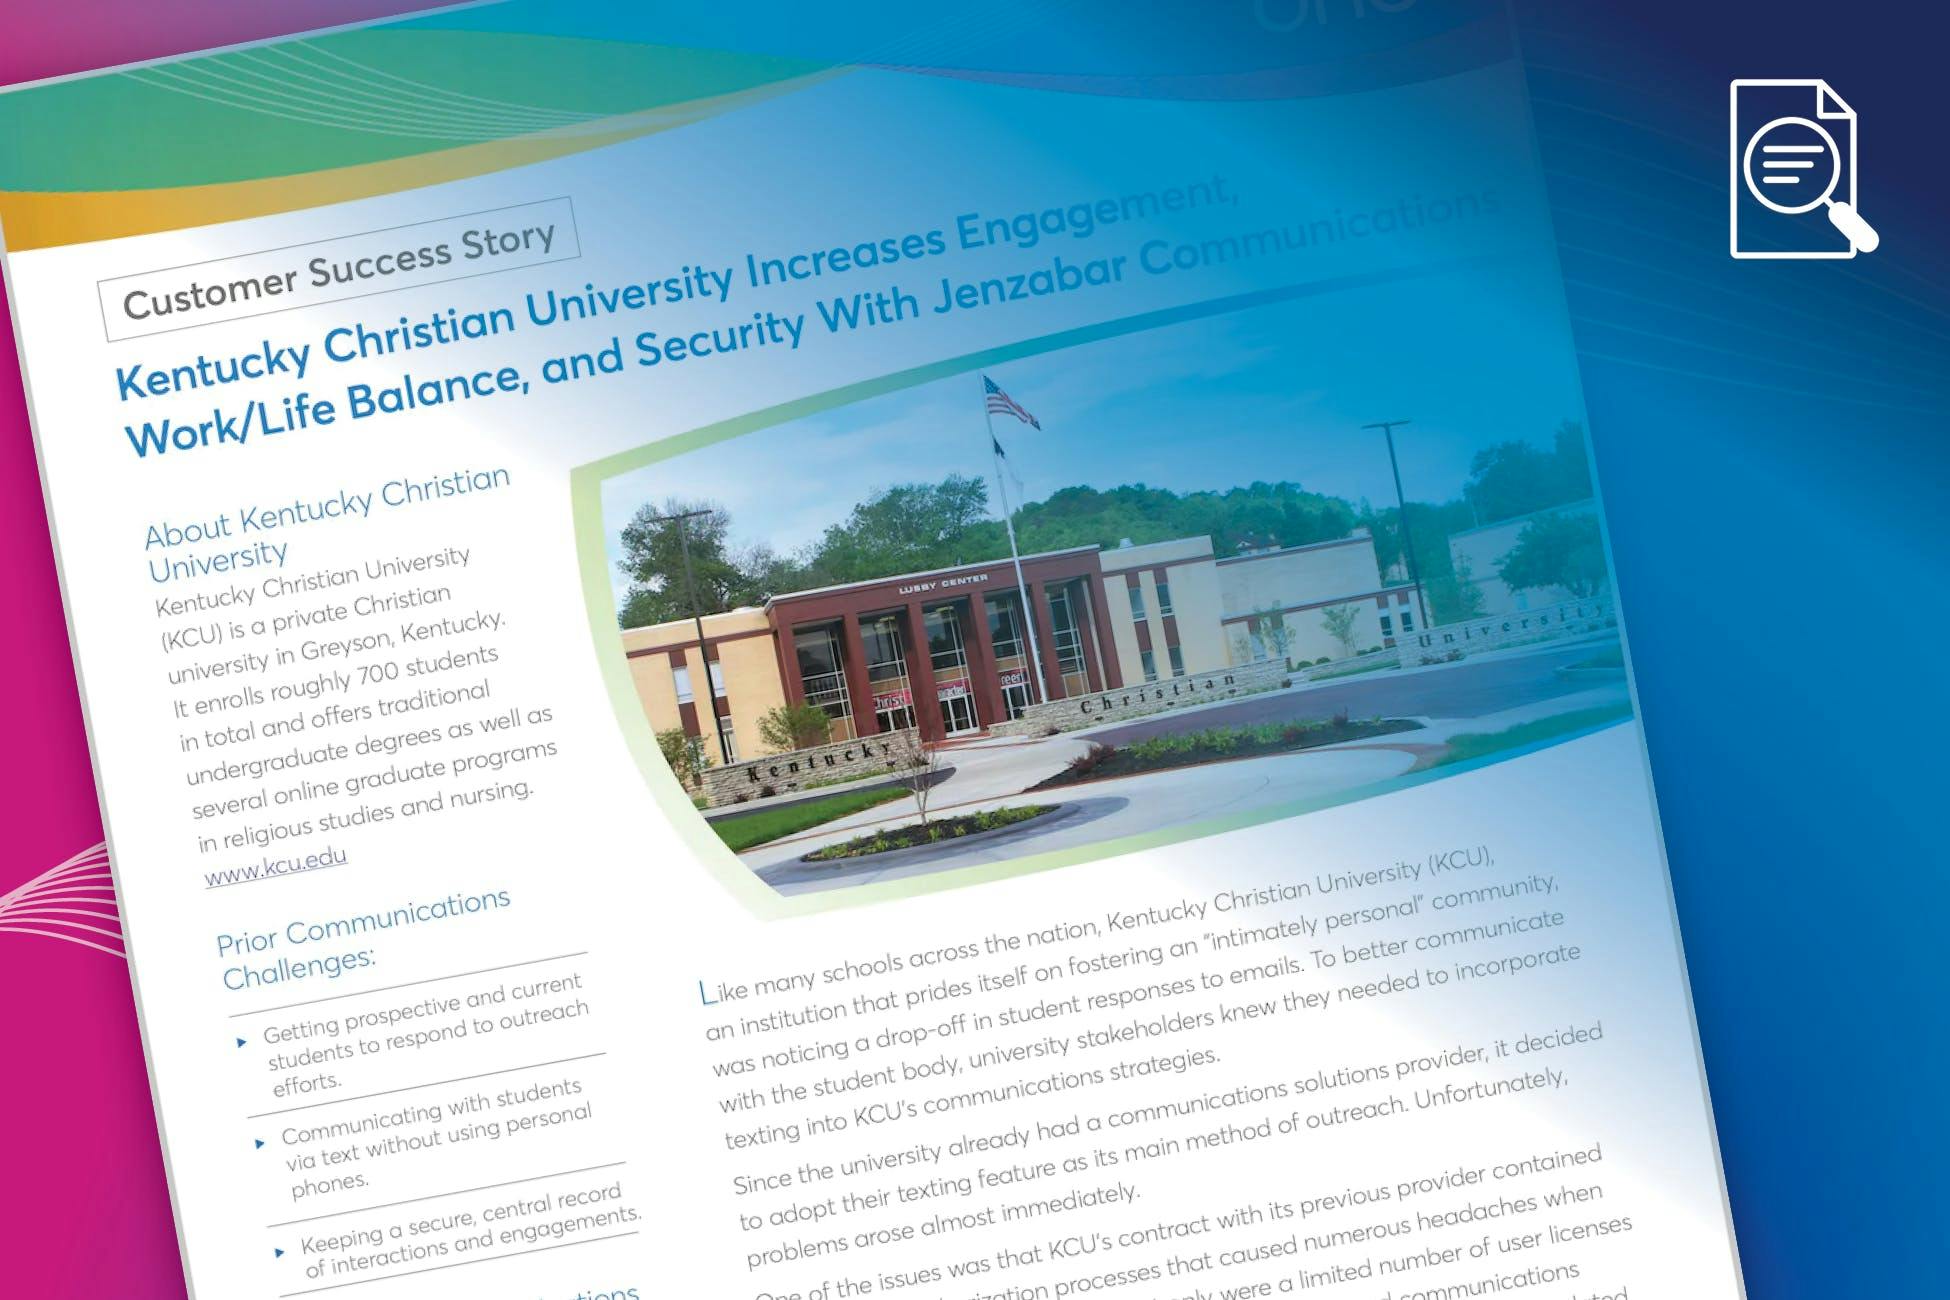 Case Study: Kentucky Christian University Increases Engagement, Work/Life Balance, and Security With Jenzabar Communications